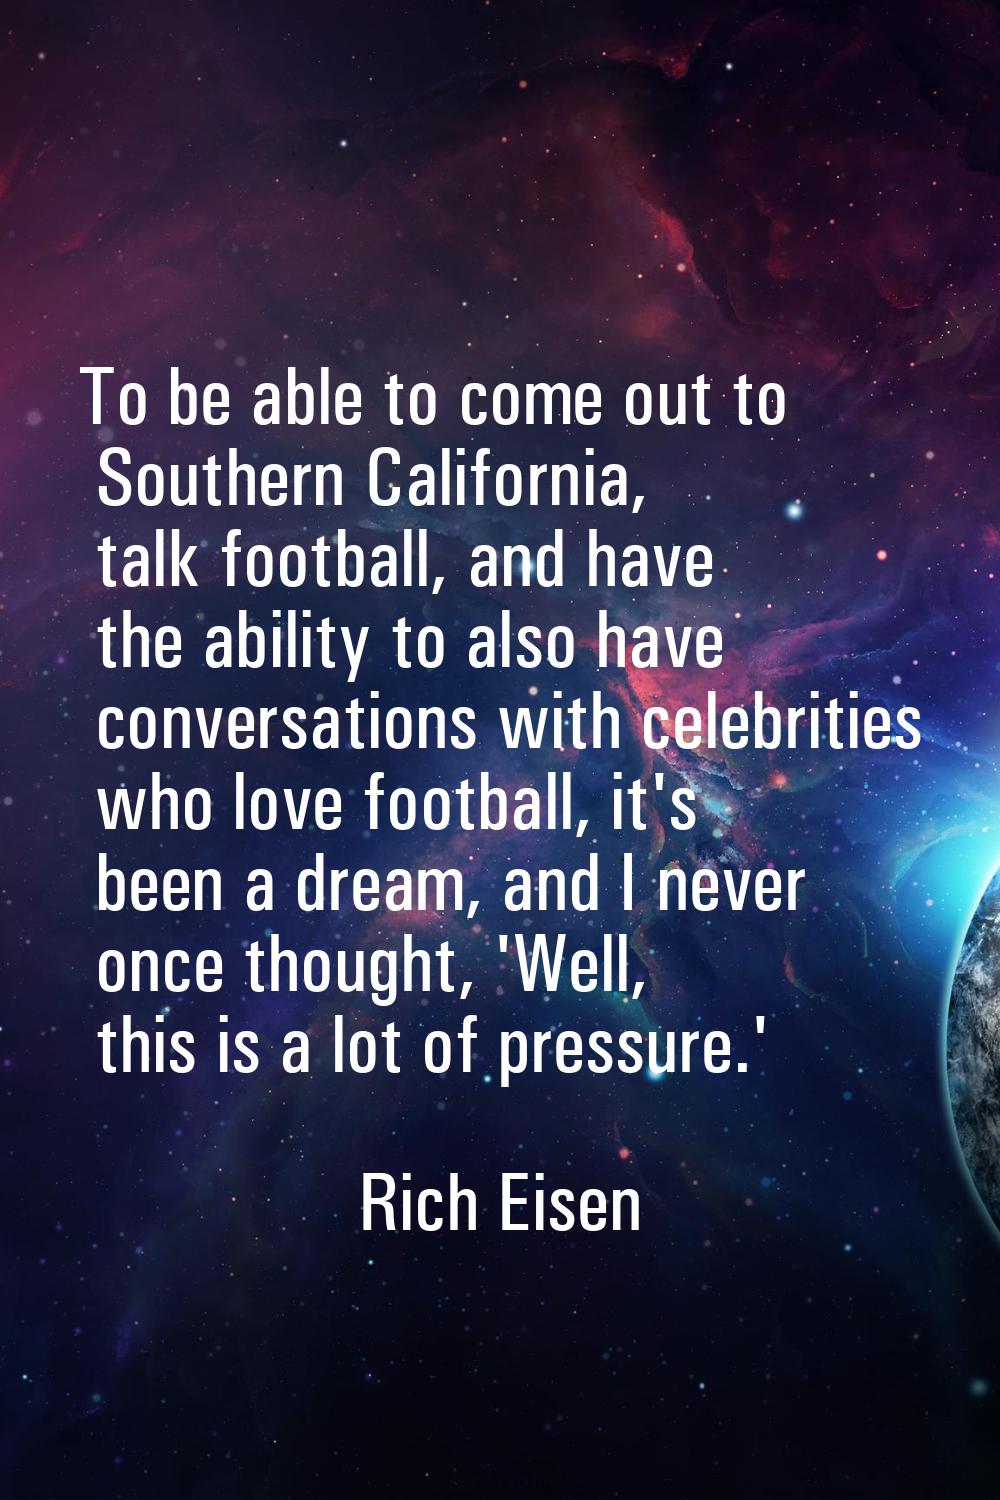 To be able to come out to Southern California, talk football, and have the ability to also have con